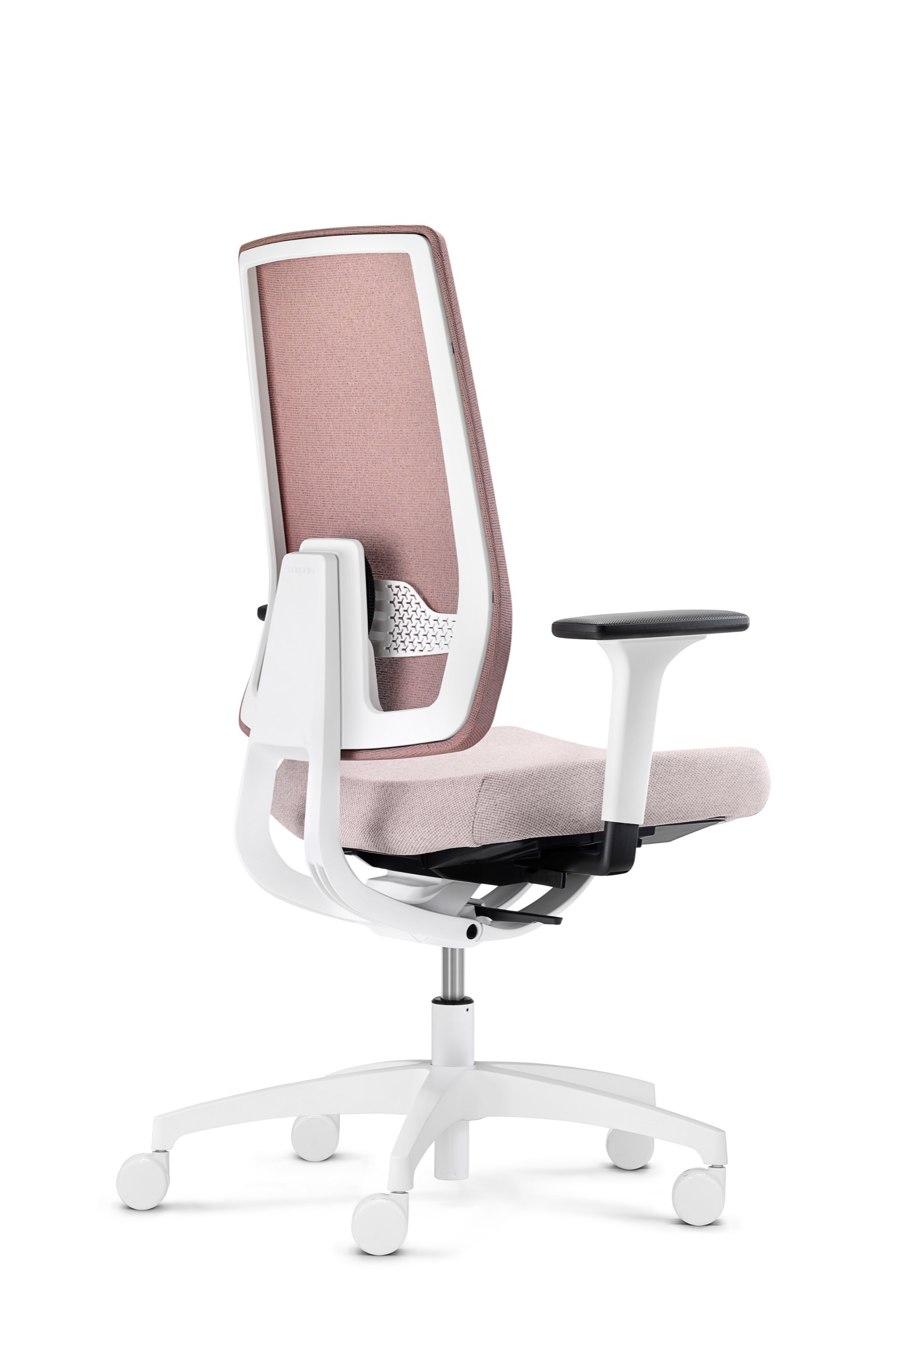 It's Automatic: Dauphin unveils the flexible office chair Indeed automatic | News